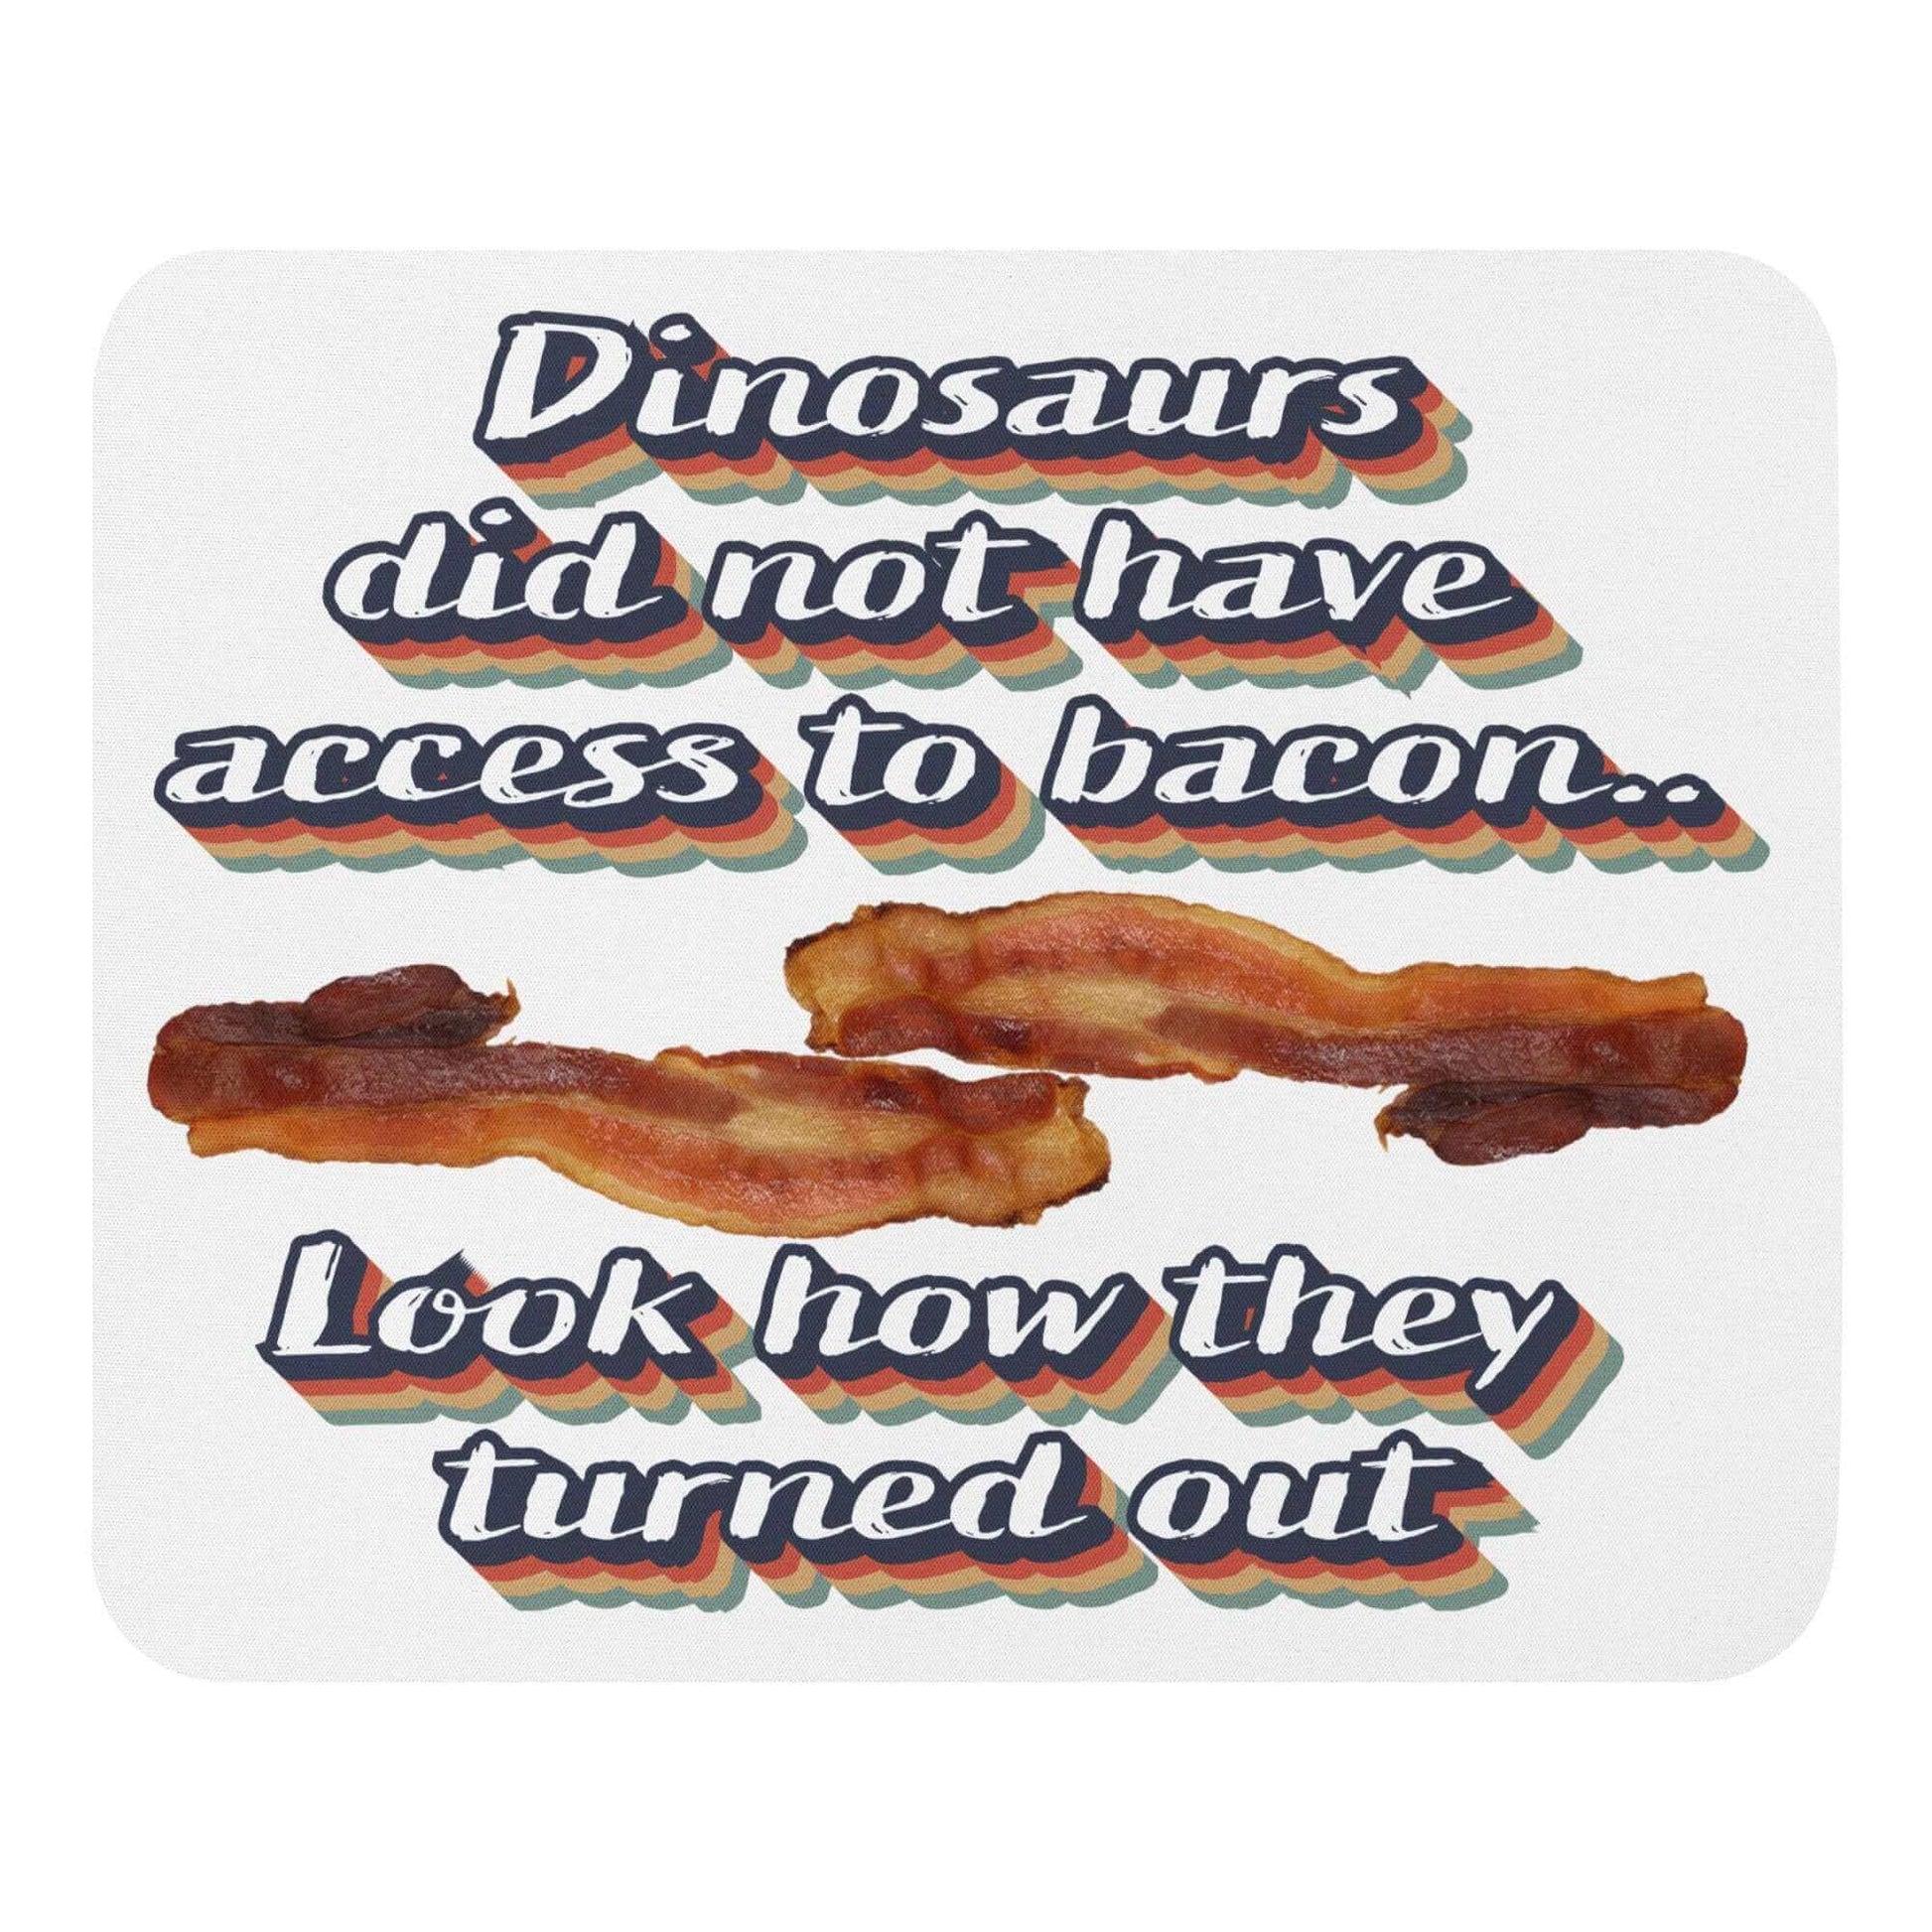 Dinosaurs did not have access to bacon.. Look how they turned out - Mouse pad Ancestral Diet Atkins Diet bacon Baconator Barbecue Butchery Carnivore Carnivorous Diet Custom mouse pad Dinos dinosaurs eat Fishing Free-Range Meat Game Meat Grass-Fed Meat Grilling High-Fat Diet Hunting IT keto Ketogenic LCHF low carb high fat Low-Carb Diet Meat Meat Candy meat diet non-slip mouse pad Omnivore Paleo Predator. Meat Eater Protein Protein Shake Red Meat Steakhouse White Meat